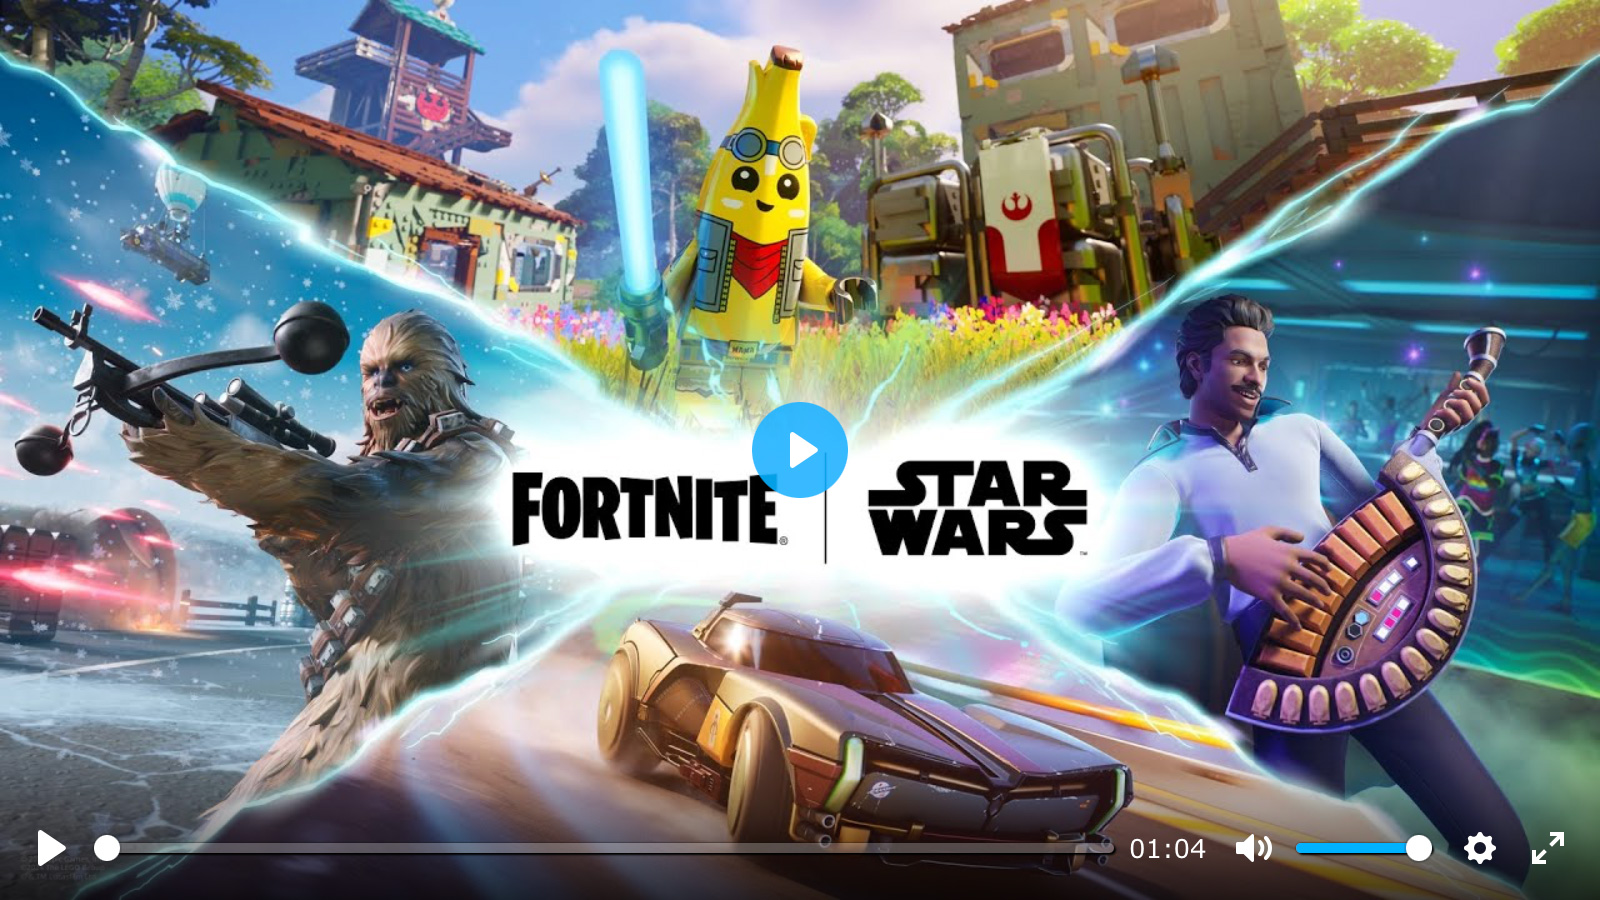 Gameplay Trailer - Star Wars Lands In The Fortnite Universe